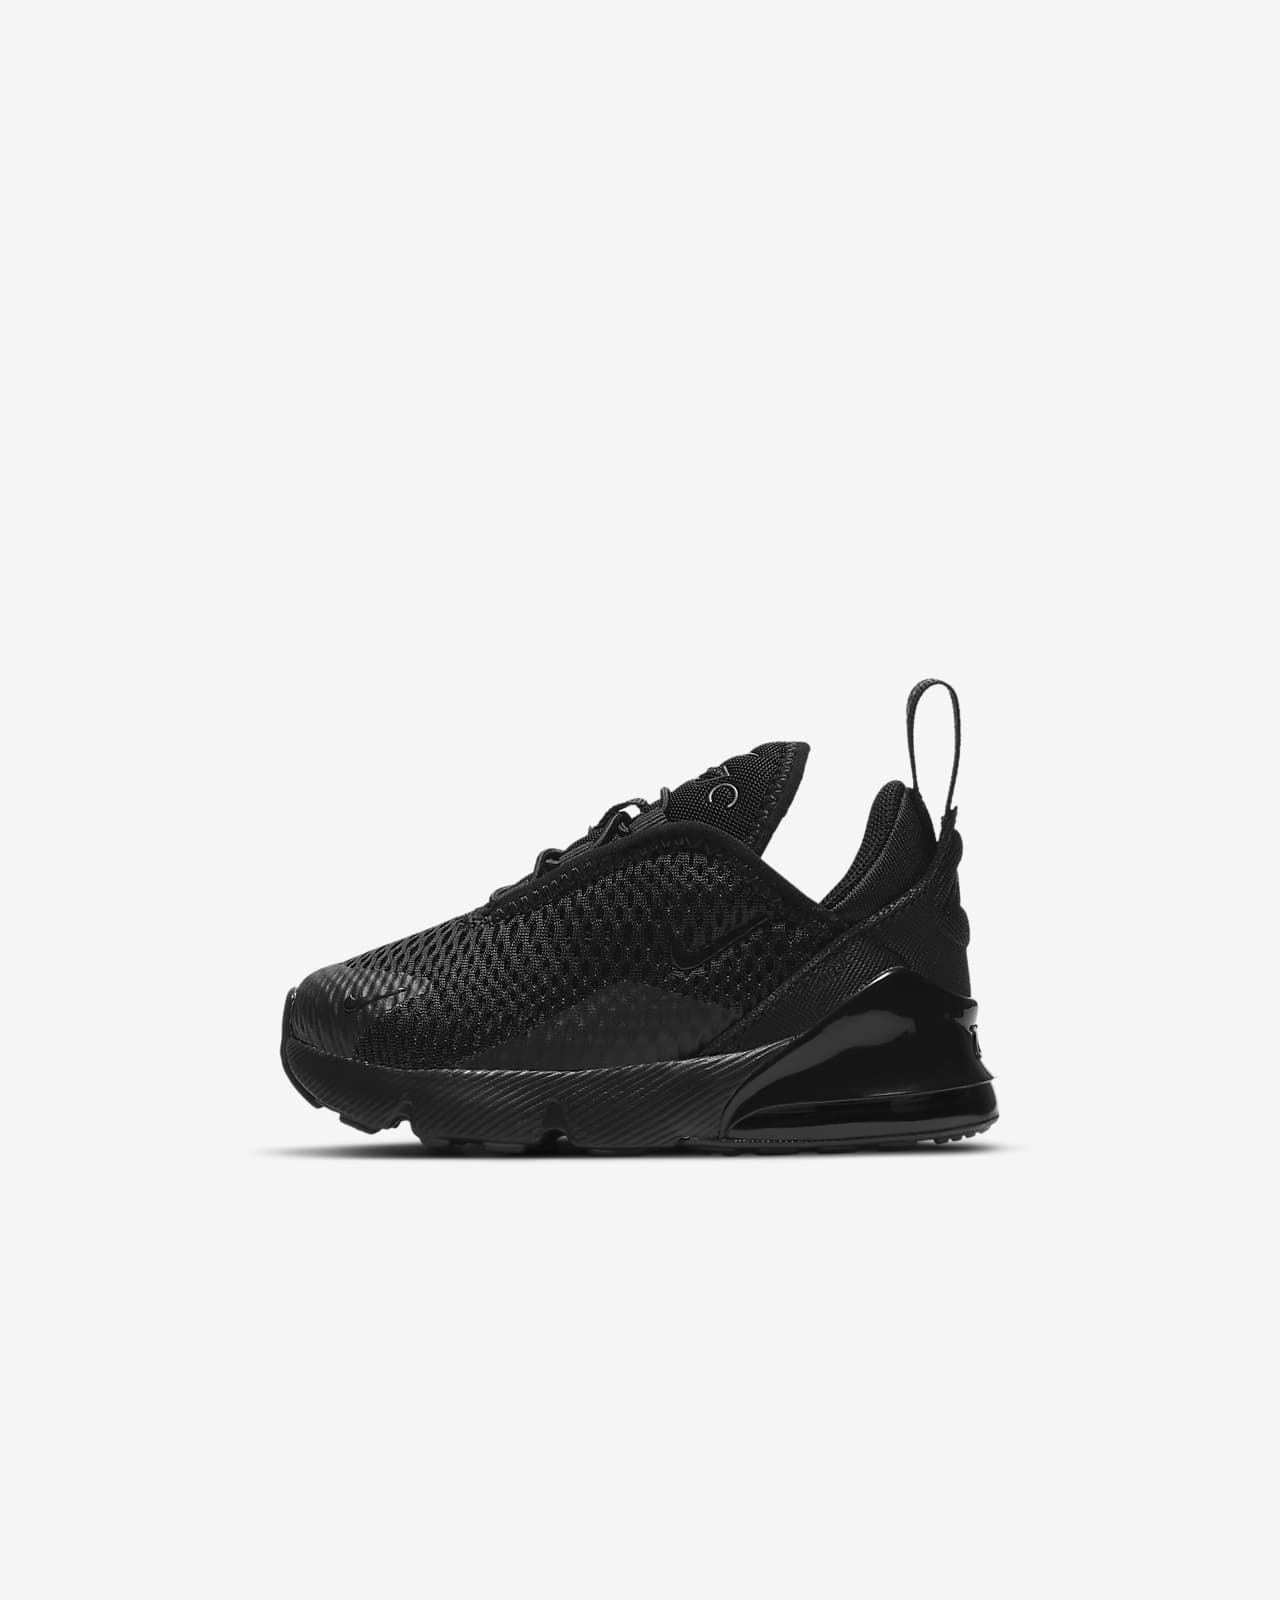 Nike Air Max 270 Baby and Toddler Shoe